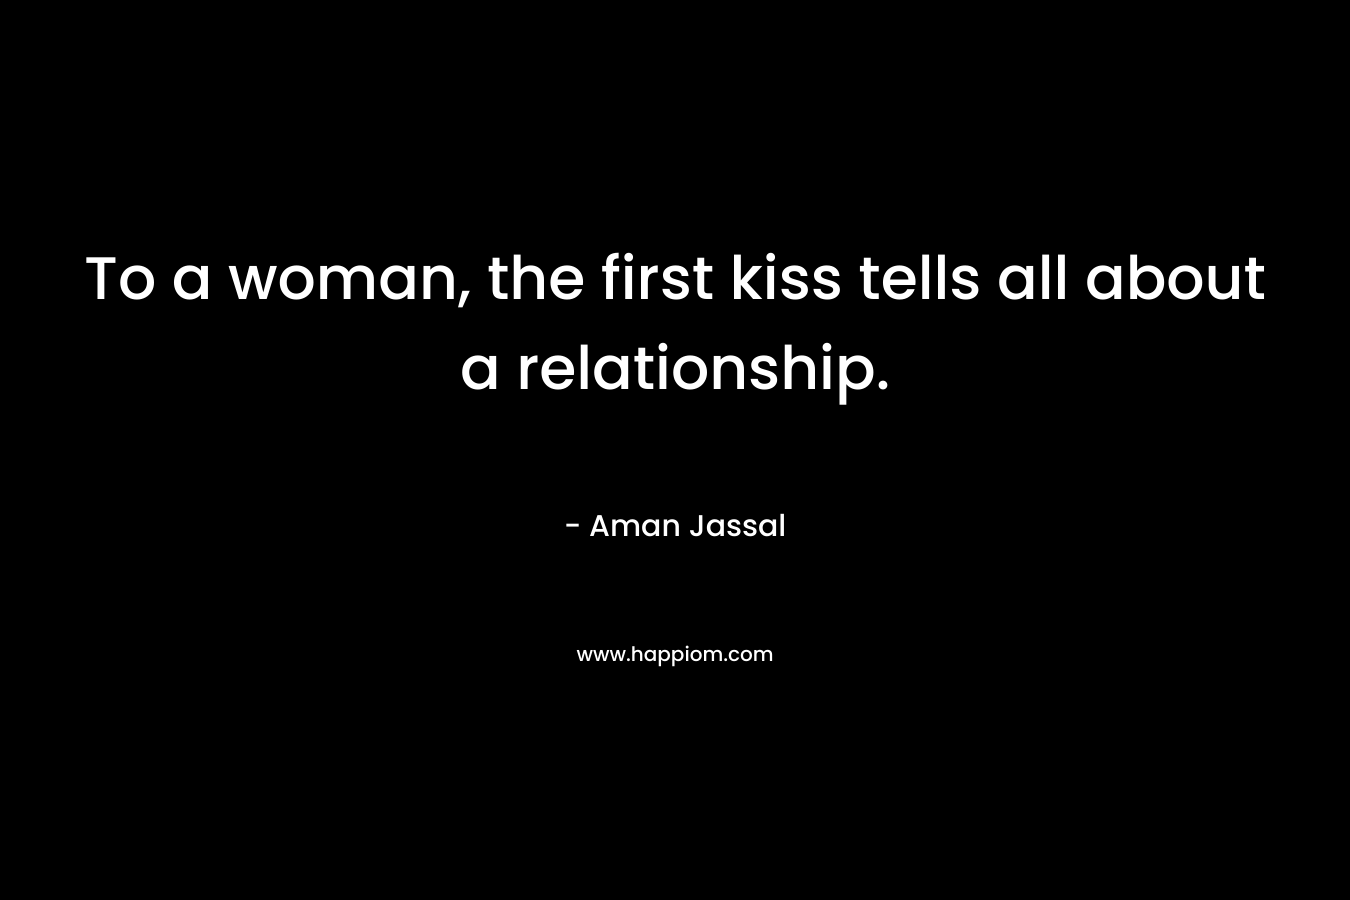 To a woman, the first kiss tells all about a relationship. – Aman Jassal